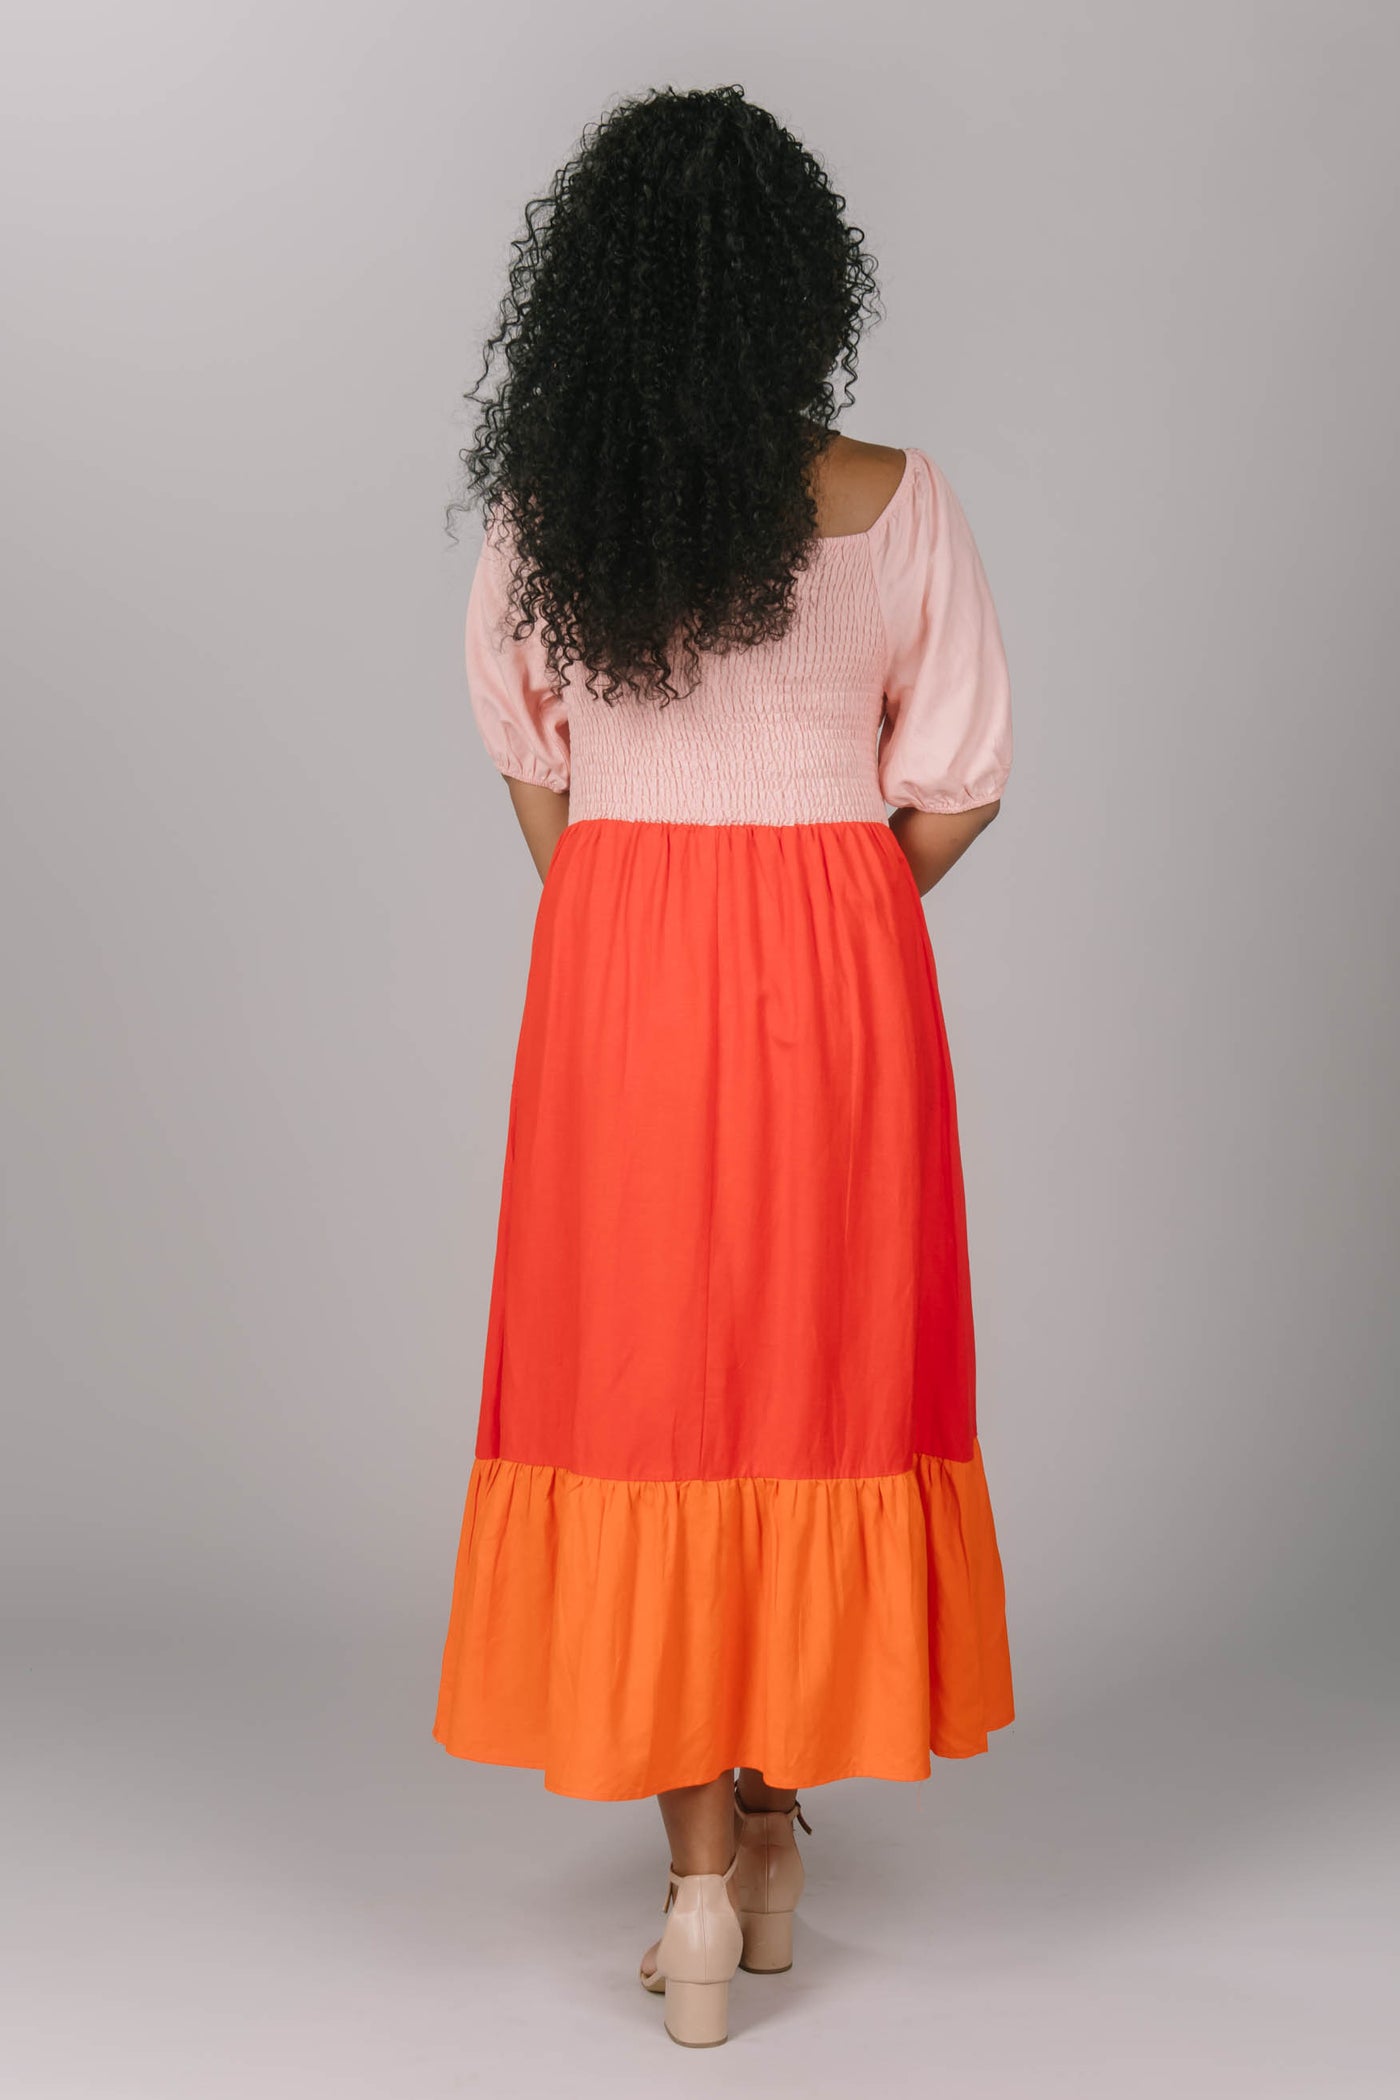 Back view of the smocked color block midi dress. This modest everyday dress has a square neckline and a tiered skirt. It is pink, red and orange bringing more love and color to any modest woman.